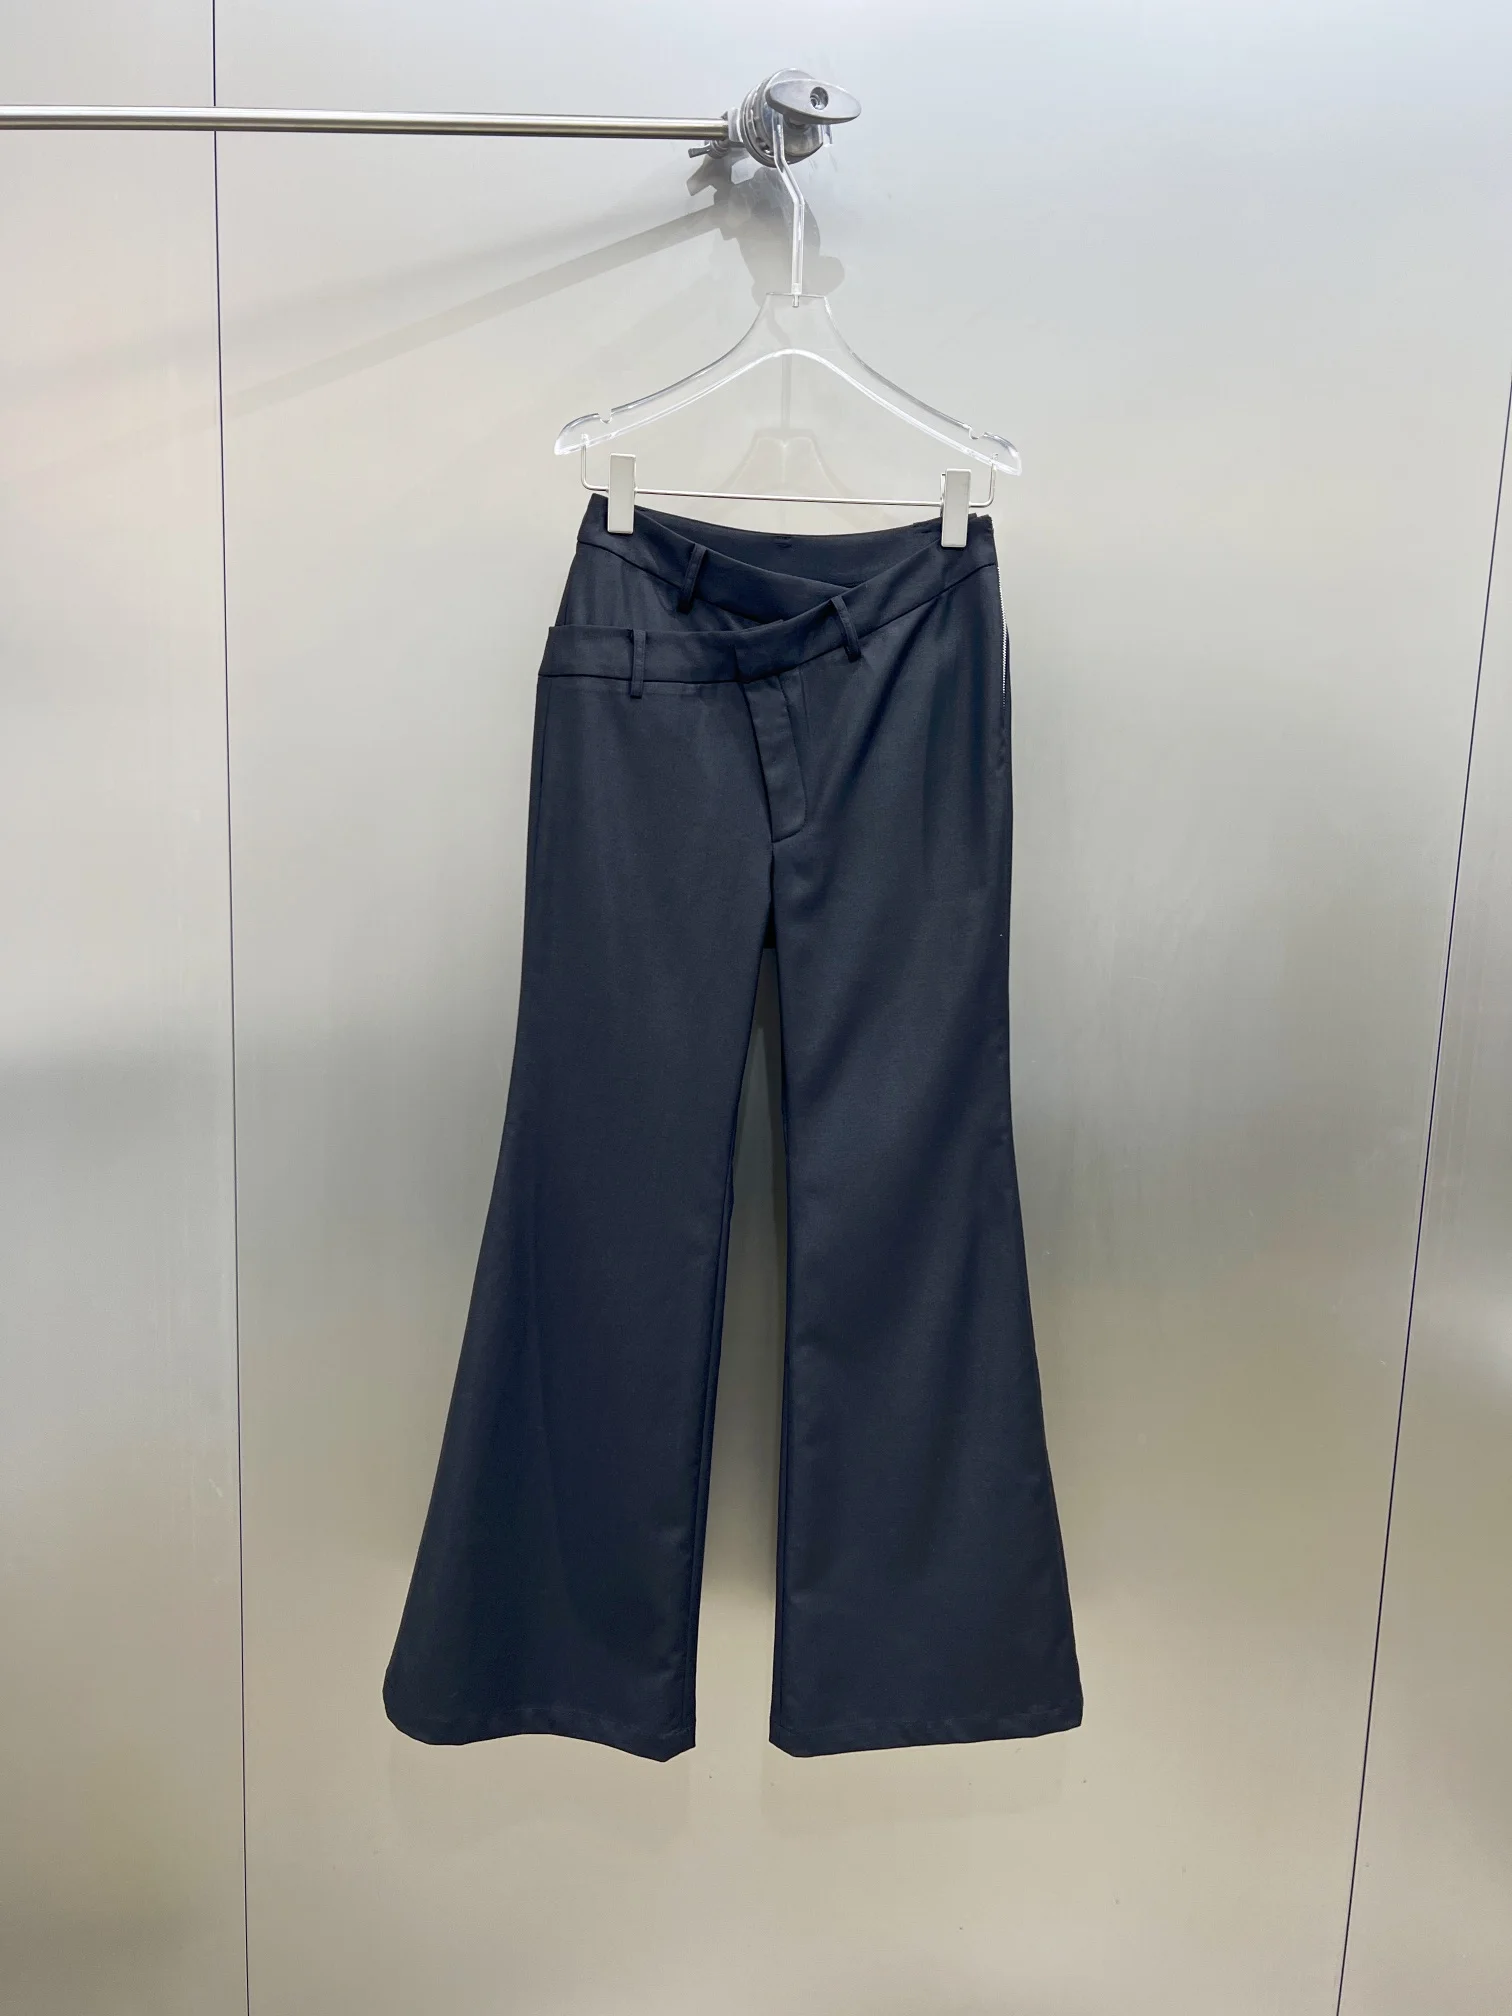 The new high and low double waist micro - la pants elongated leg type straight tube micro - la version is very easy to handle